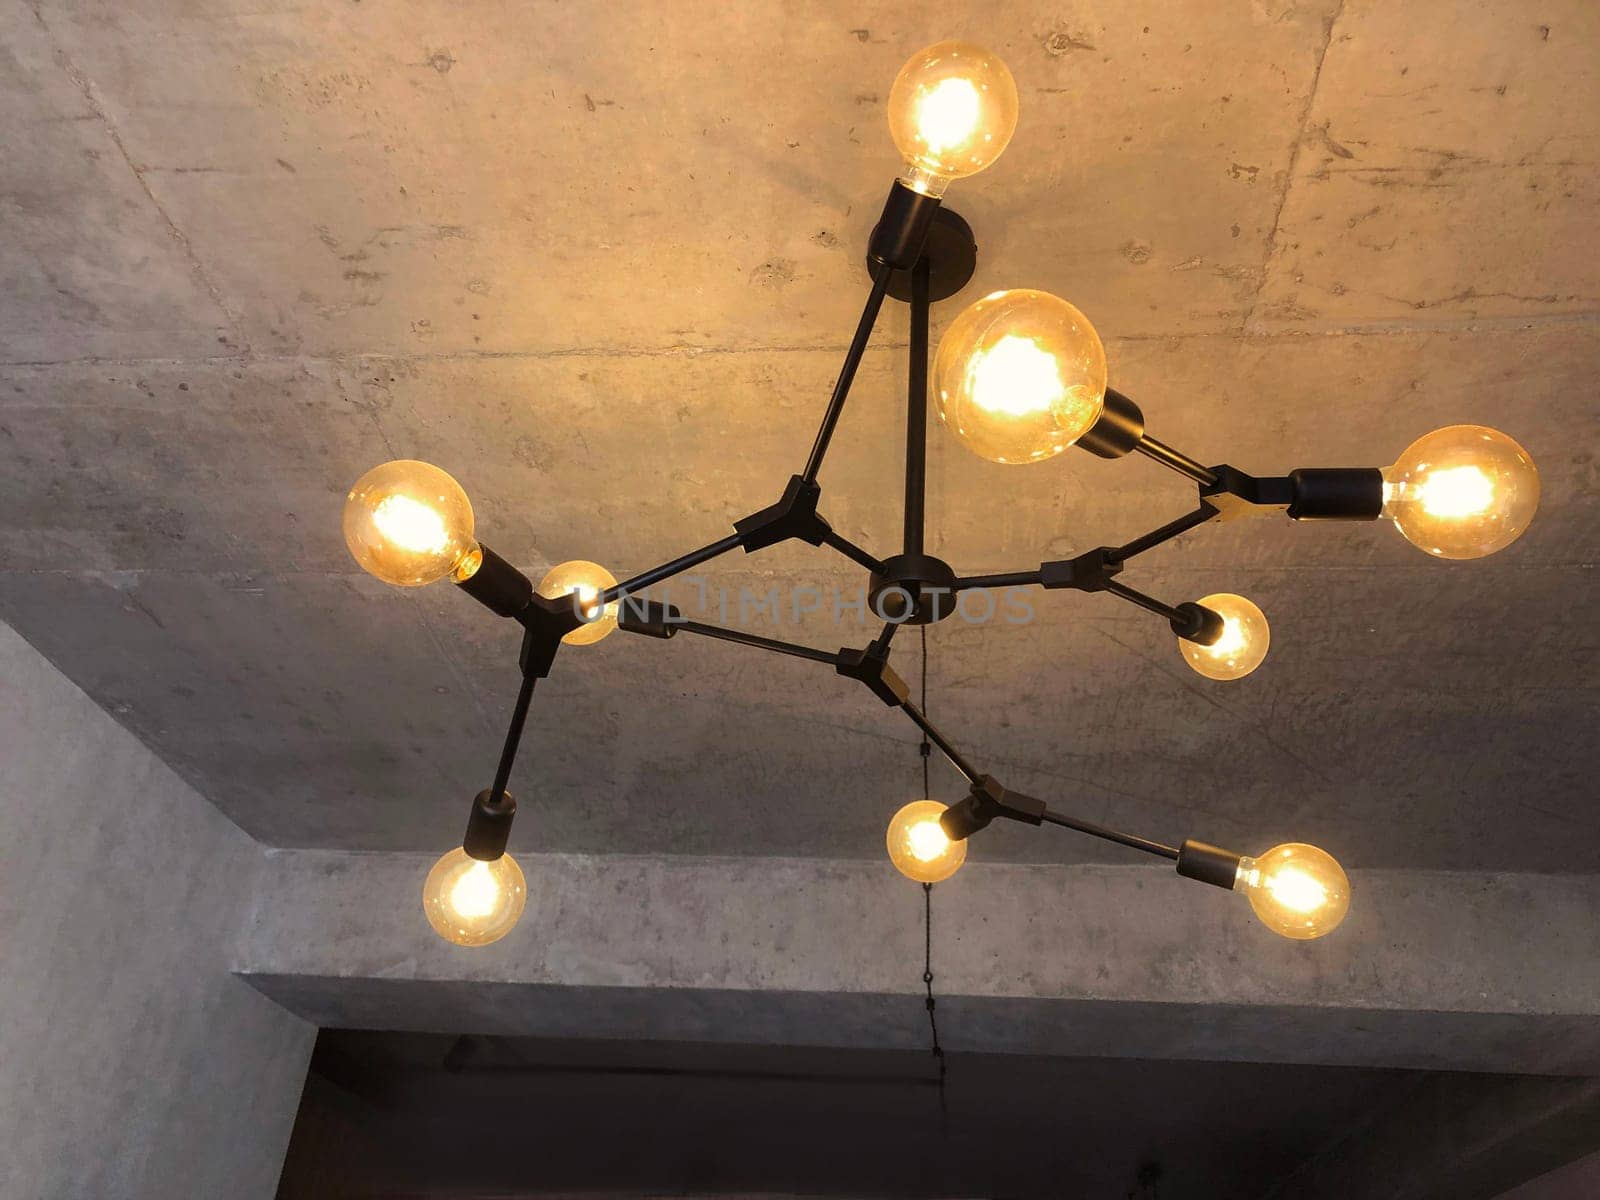 Light bulbs with warm lighting in stylish chandelier on gray concrete ceiling by Rohappy